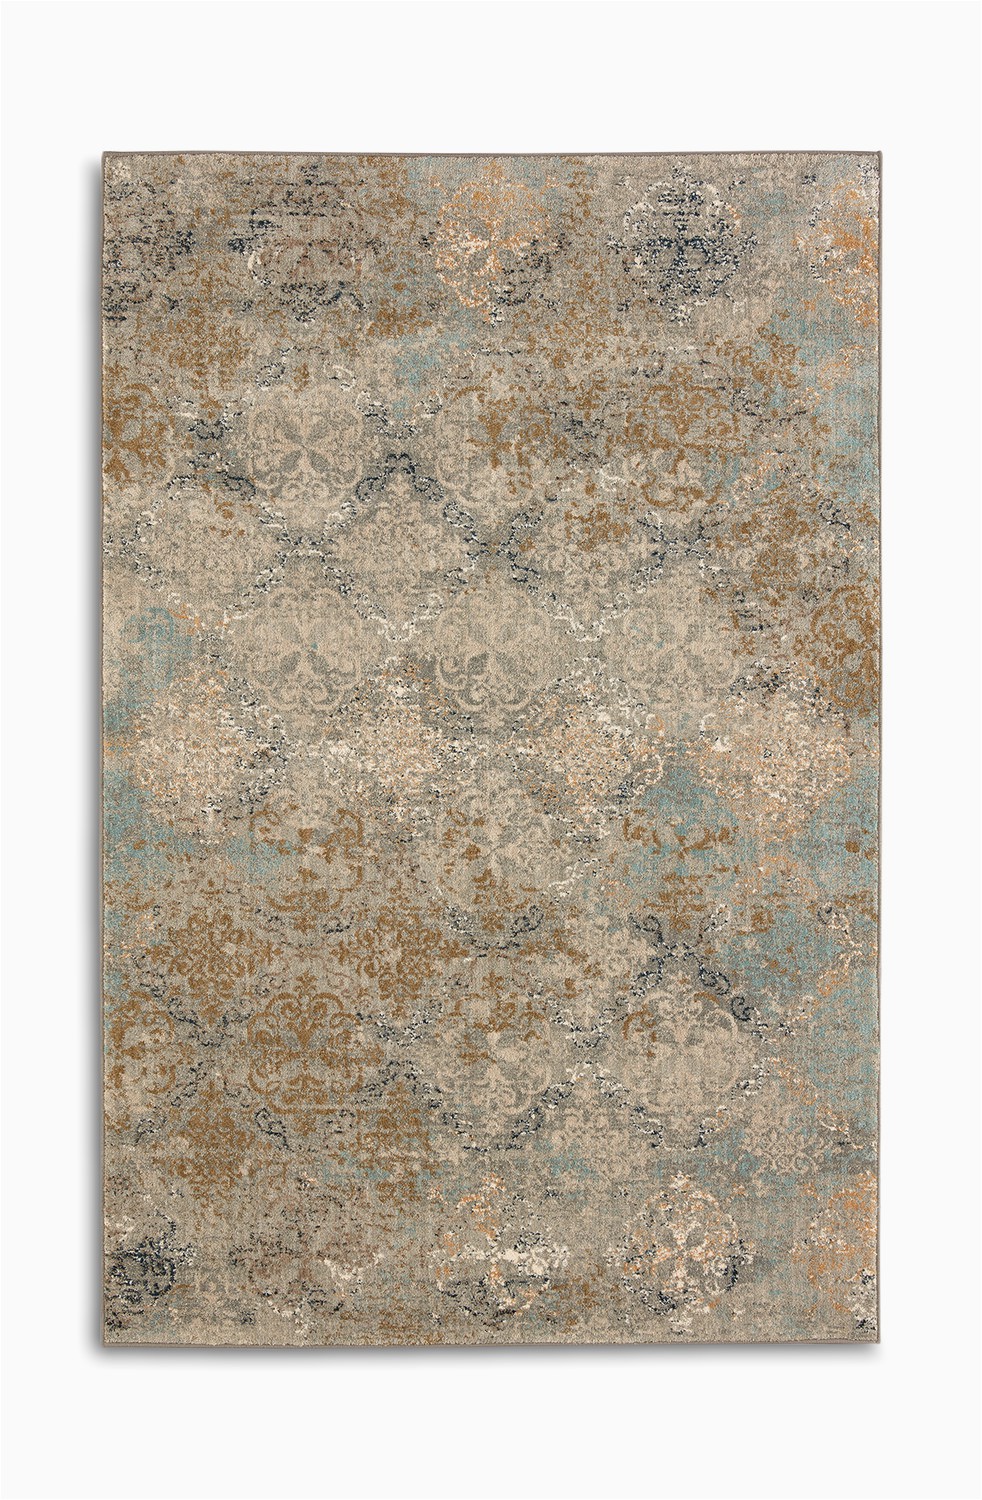 6 X 5 area Rug Moy Willow Grey area Rug